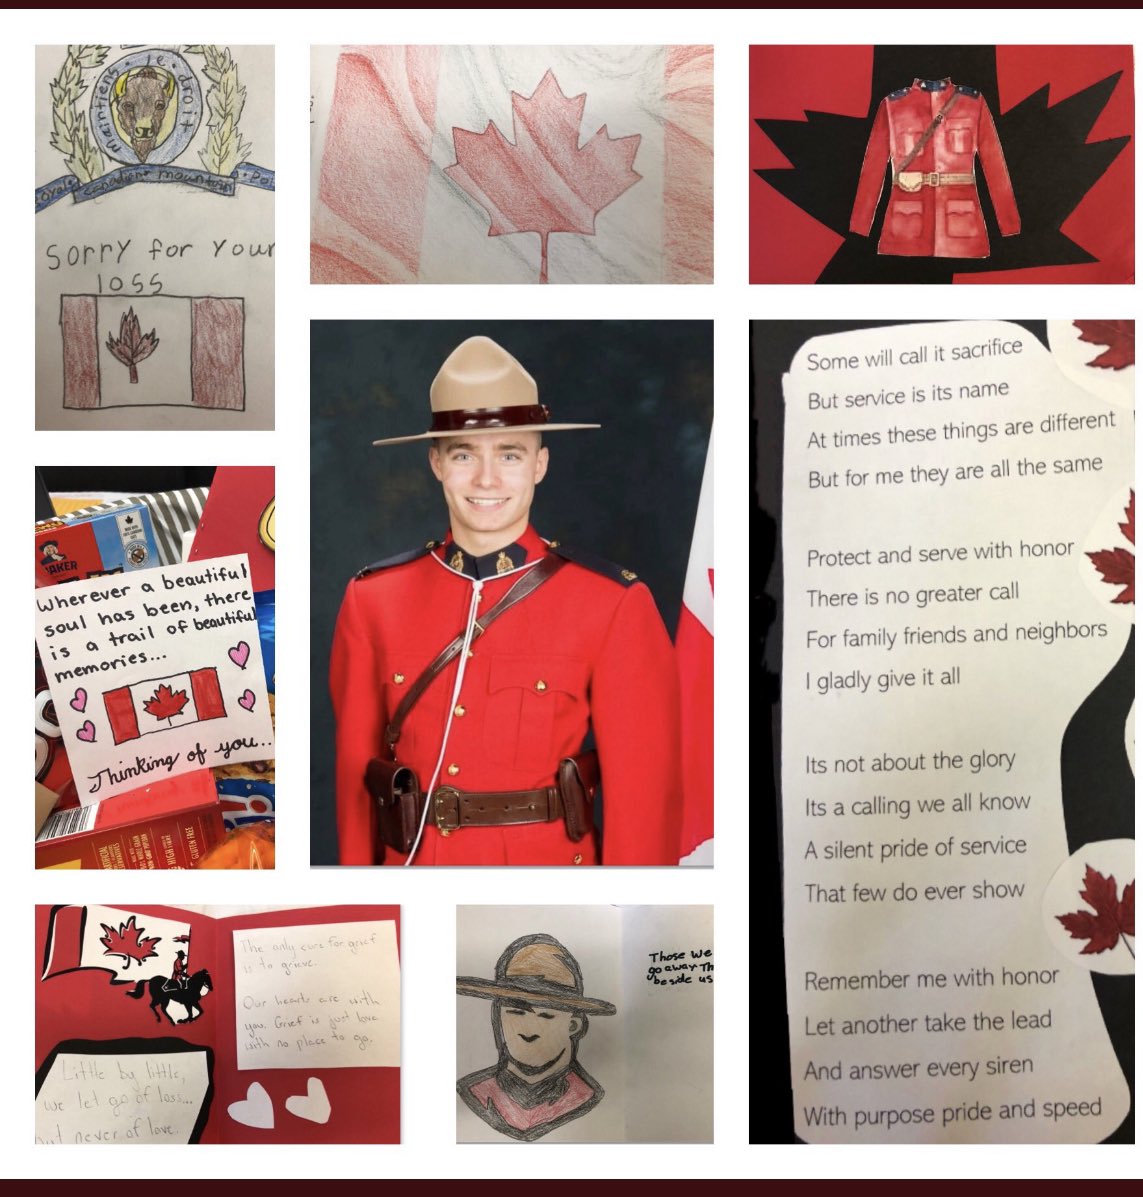 Two years ago our school said goodbye with a moment of silence to honour a hero. You could feel the love as students and staff came together to show support for Cst. Shelby Patton. Adorned in red, students wrote cards and poems to express their sympathy.❤️ #WeRemember